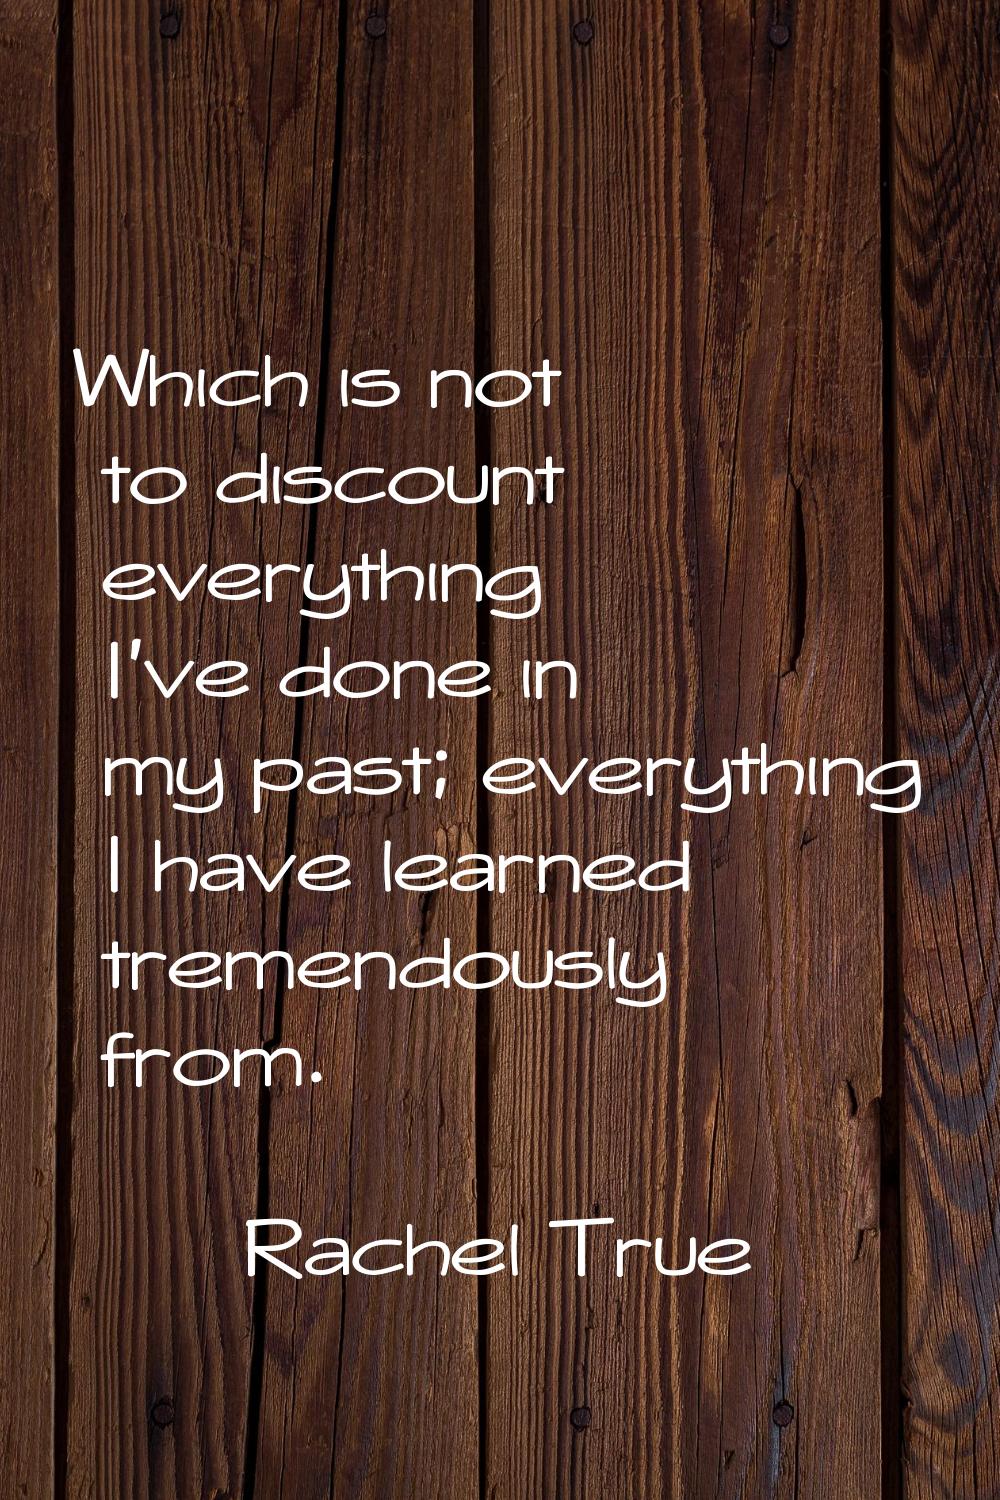 Which is not to discount everything I've done in my past; everything I have learned tremendously fr